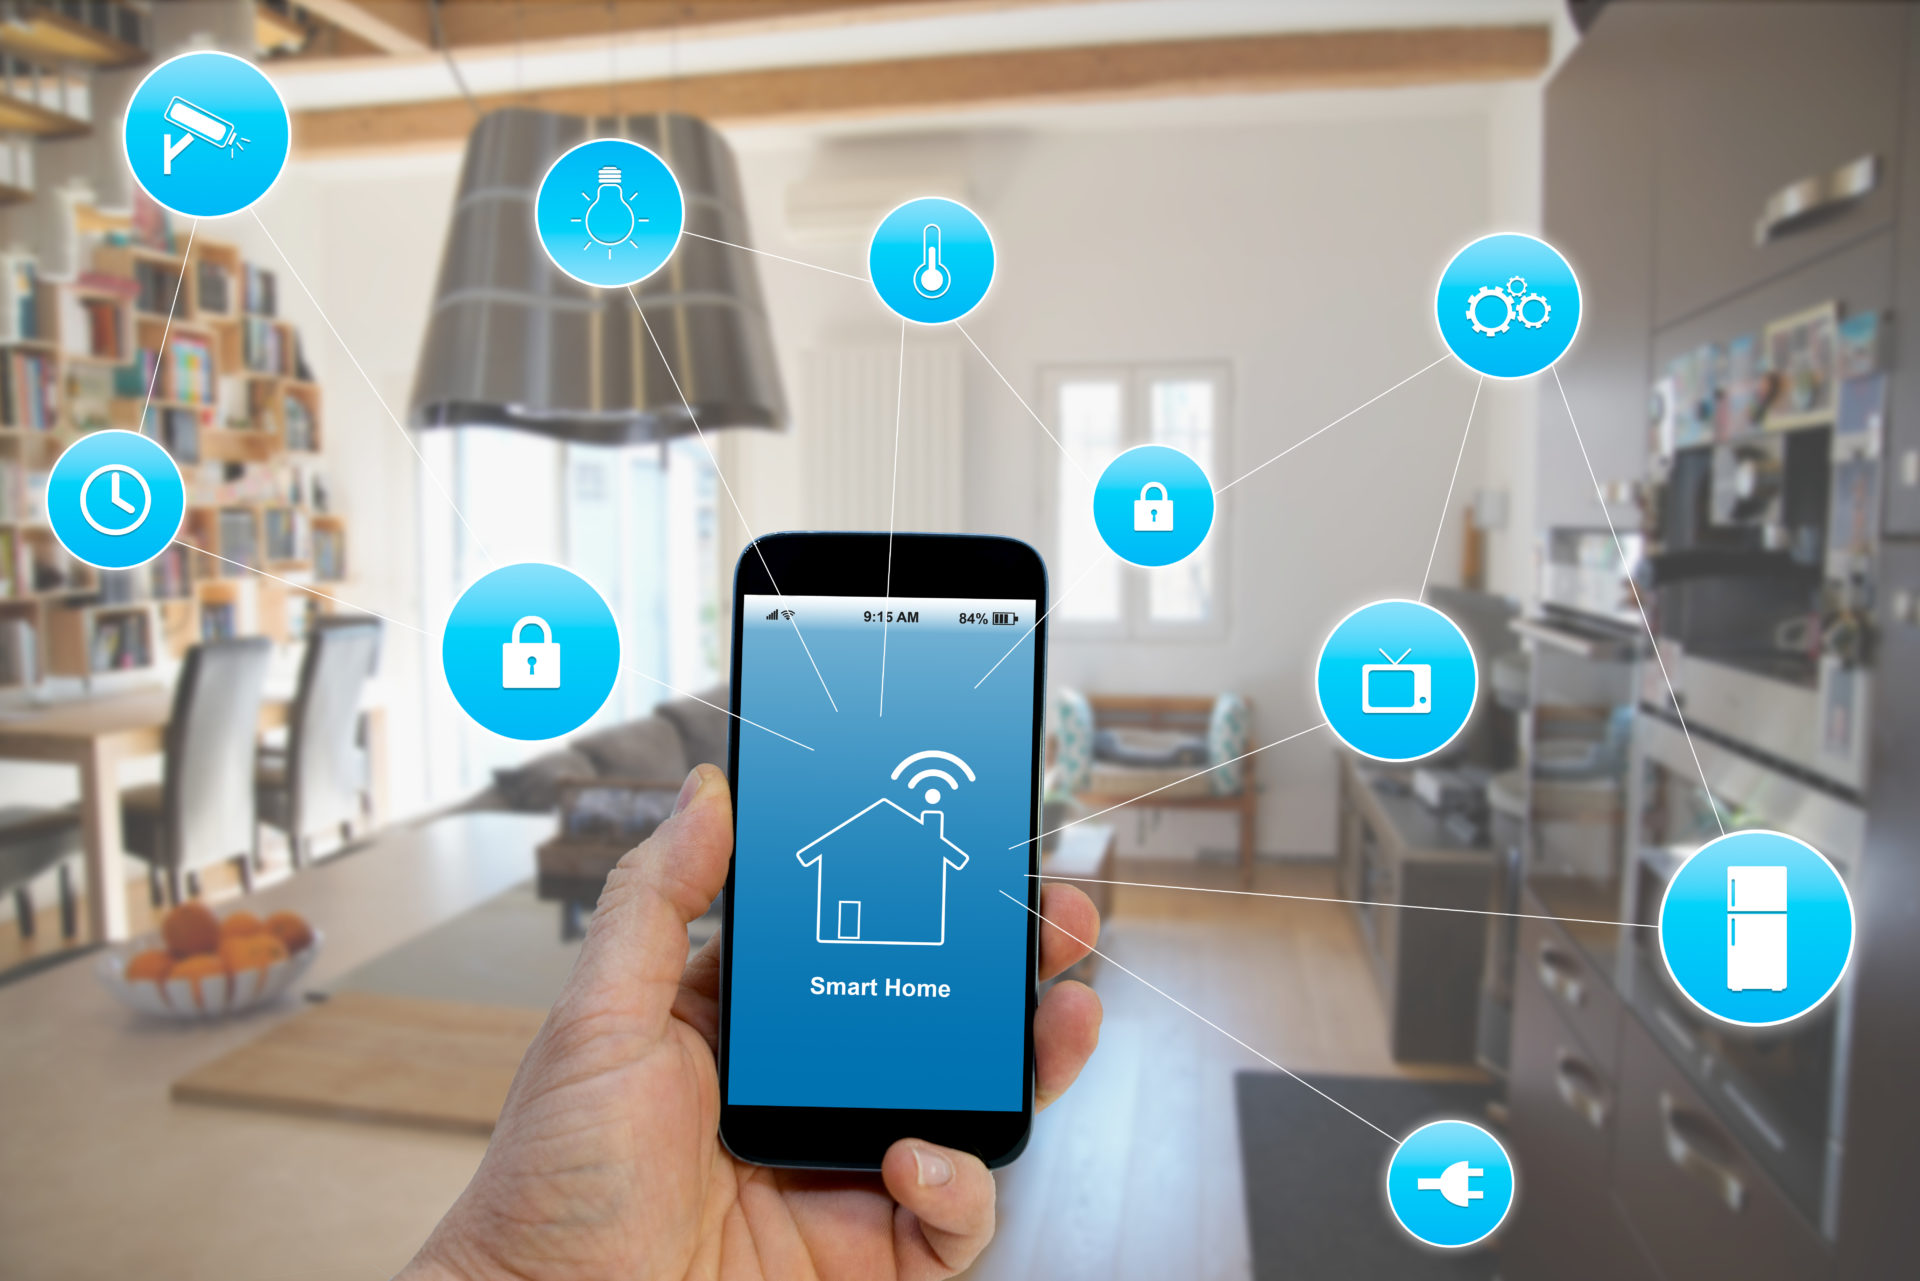 Smart Home features